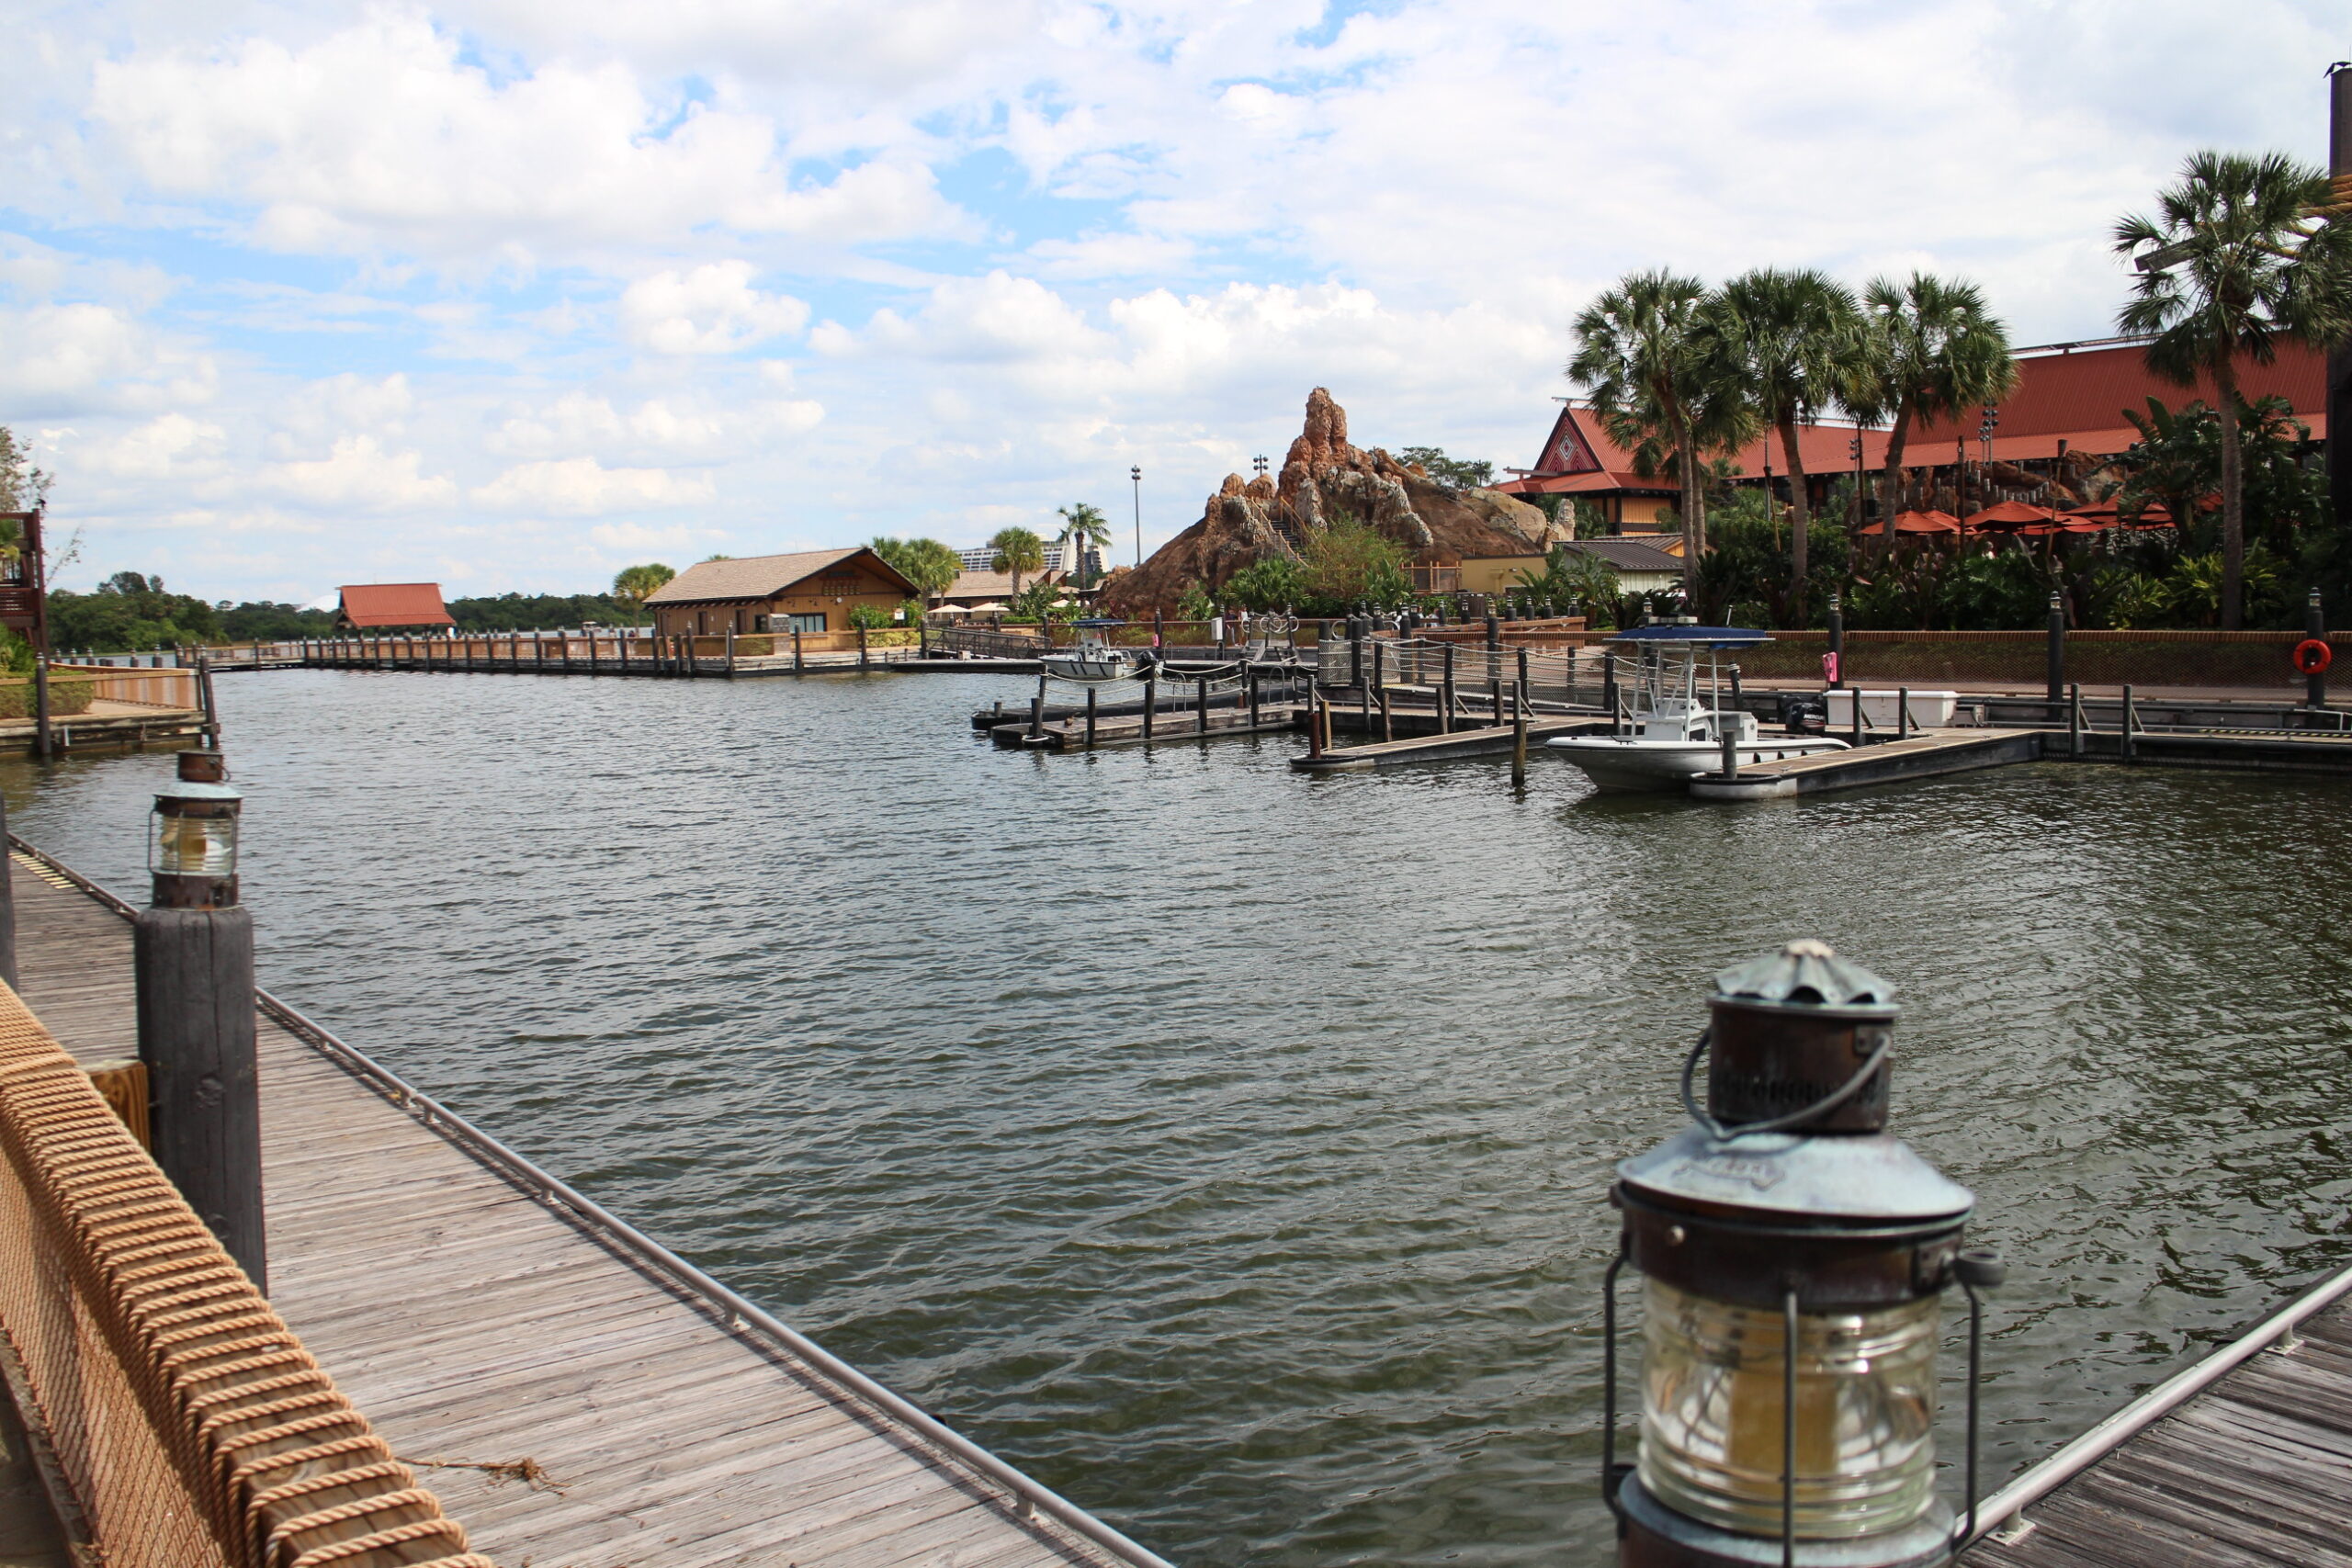 A view of the marina water with surrounding docks and Polynesian themed buildings in the distance